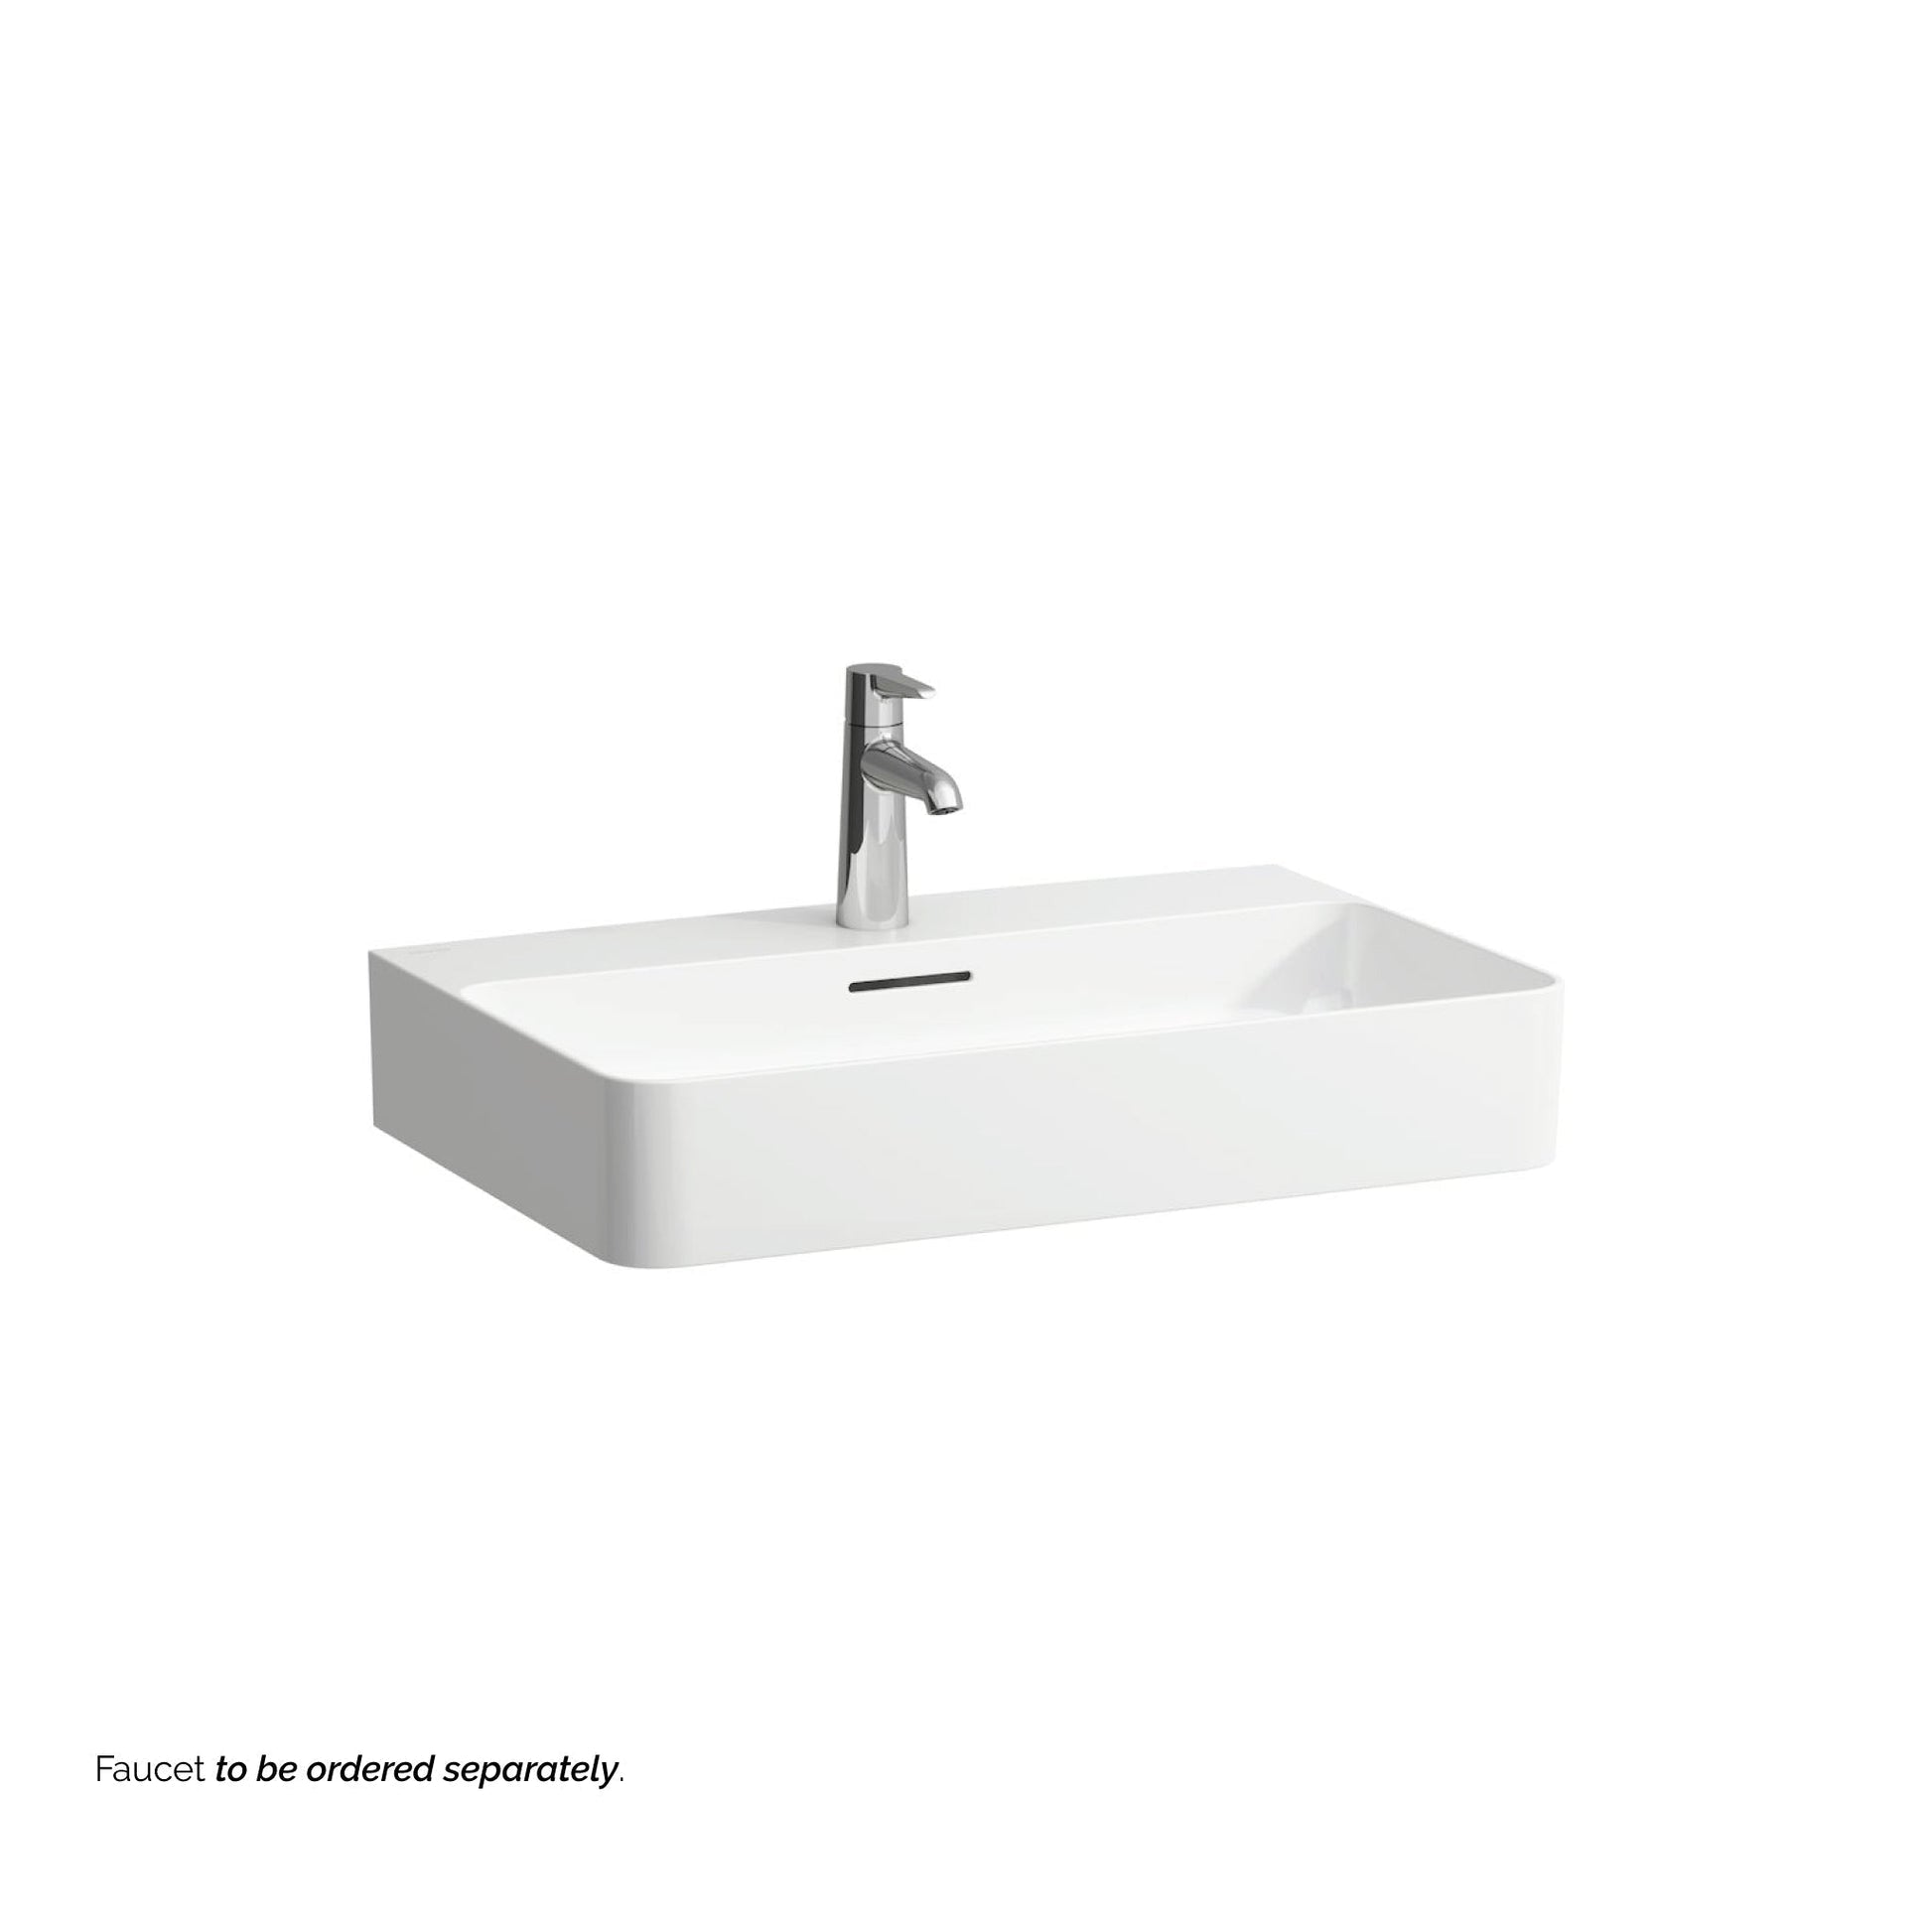 Laufen Val 26" x 17" Matte White Ceramic Wall-Mounted Bathroom Sink With Faucet Hole